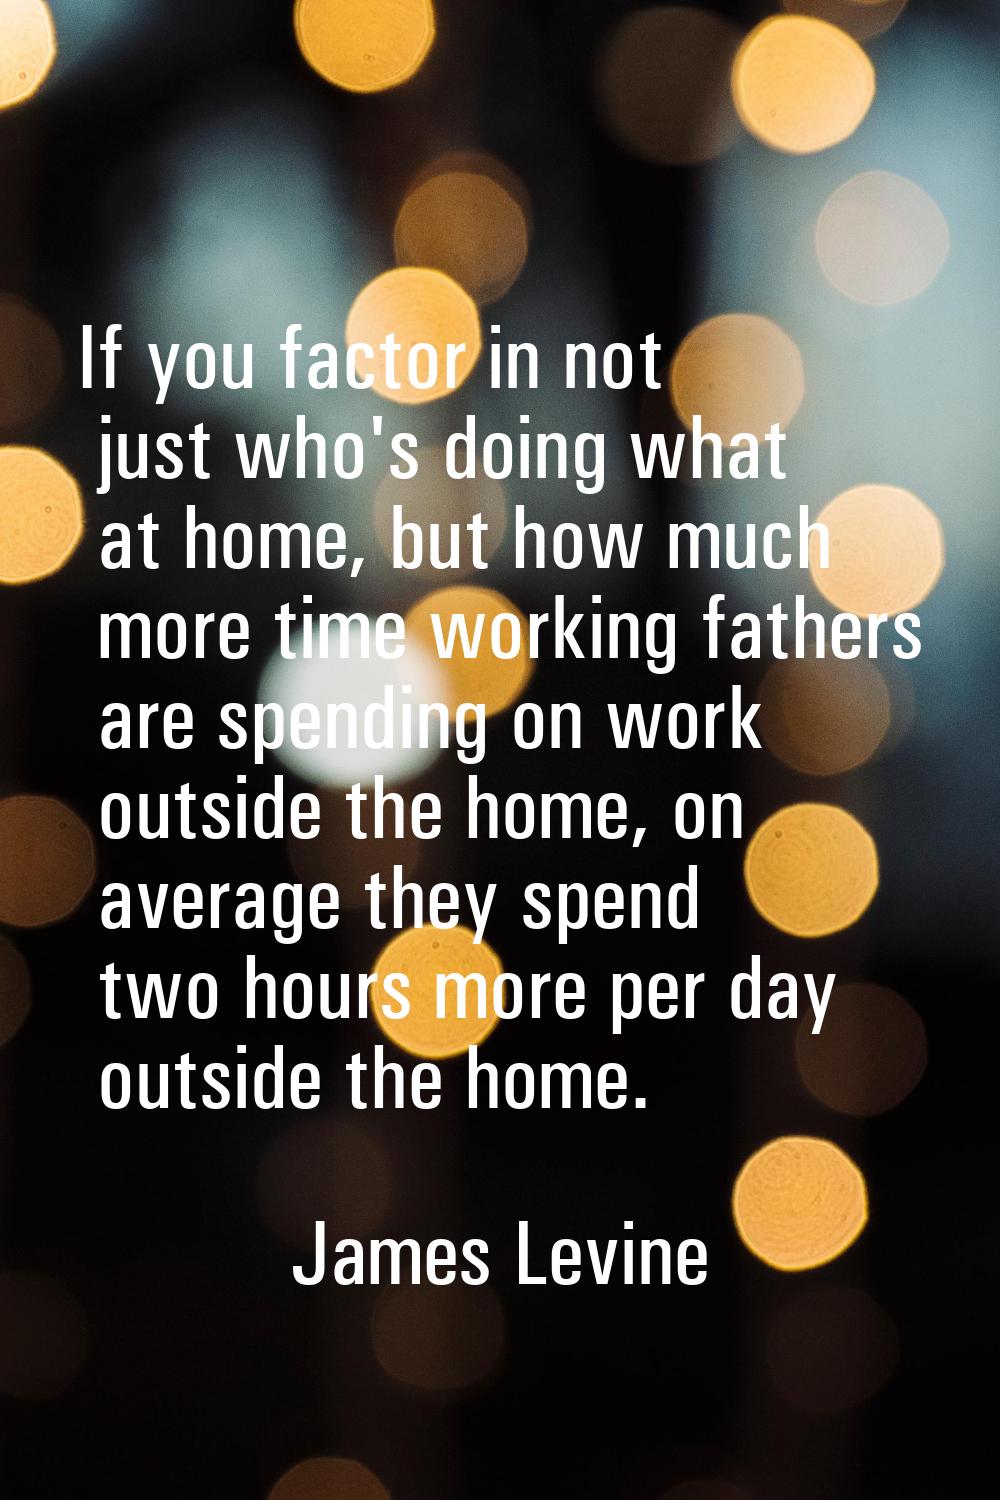 If you factor in not just who's doing what at home, but how much more time working fathers are spen